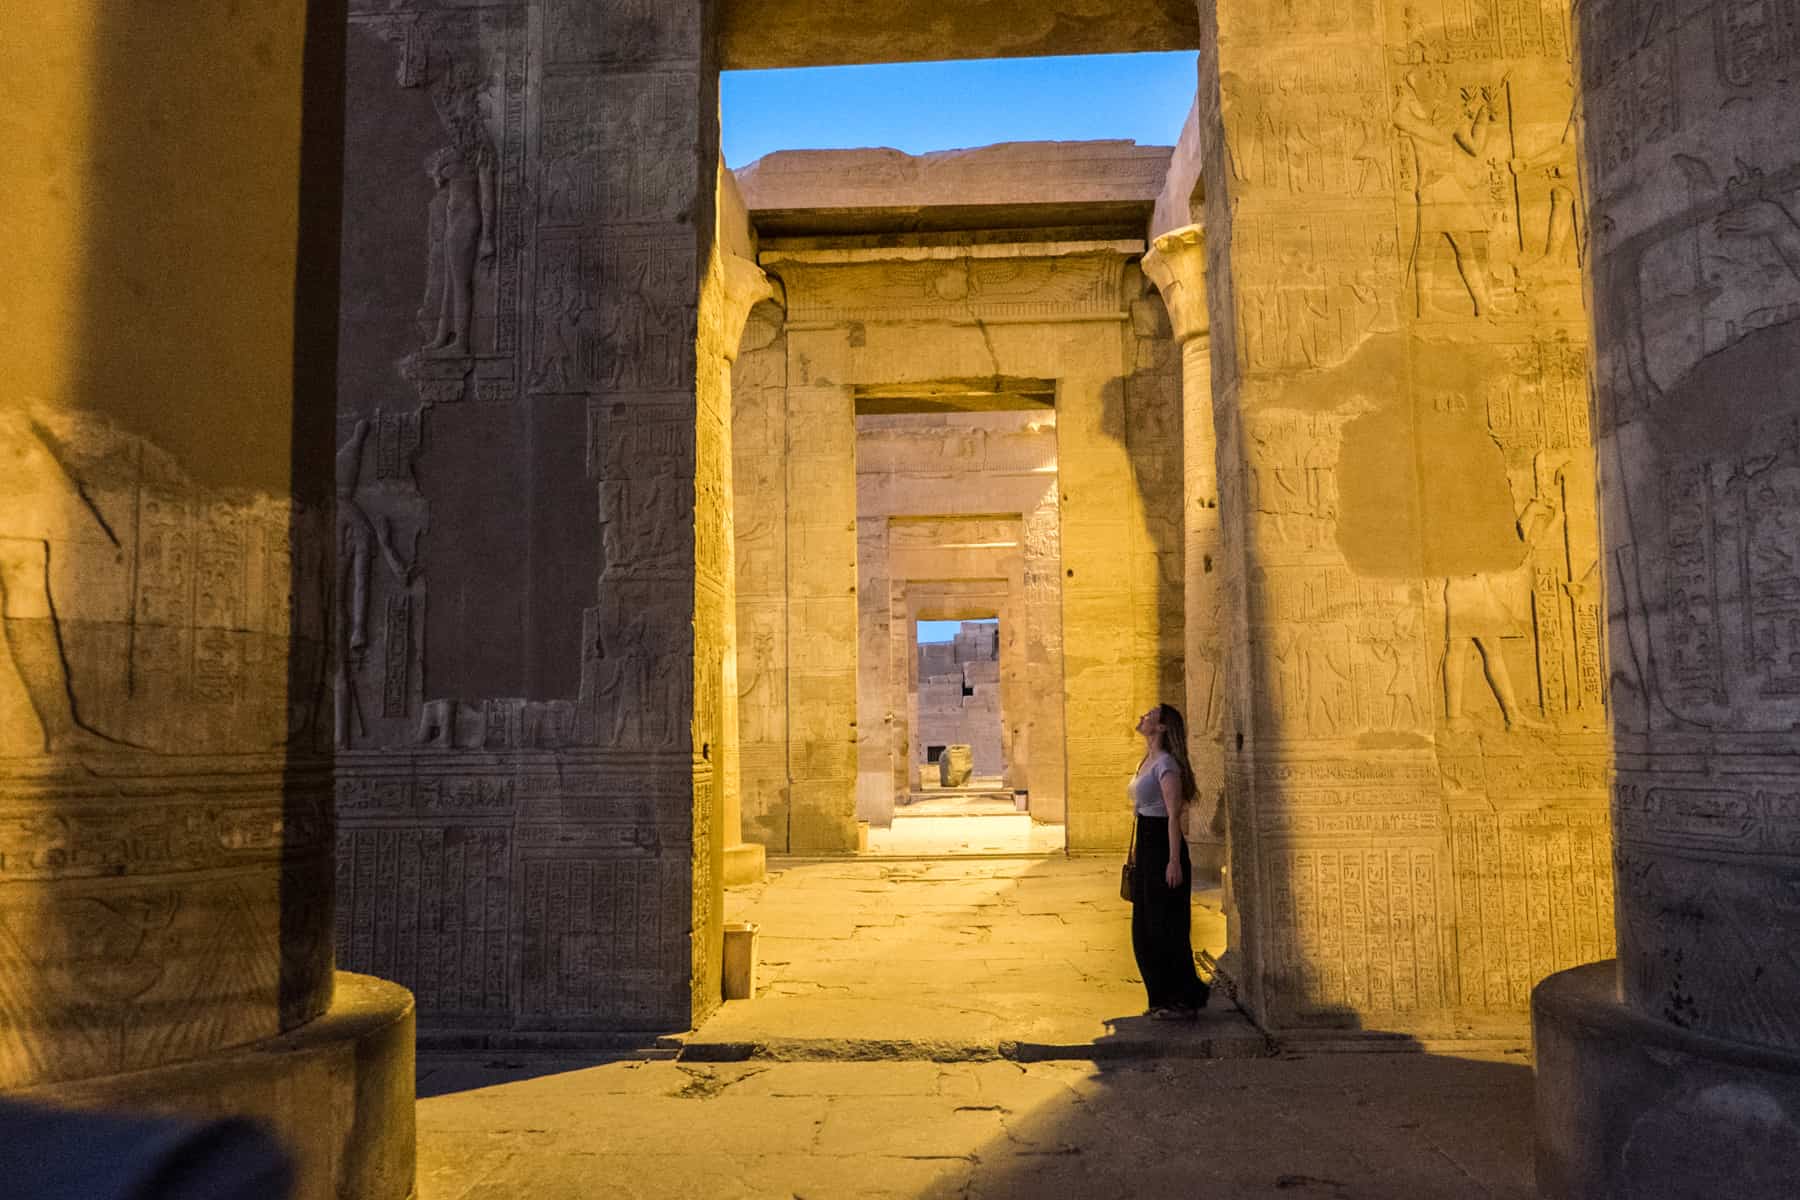 A woman stands and stares up at the tall walls of carvings at the Kom Ombo temple in Egypt, glowing in yellow light when visited in the evening